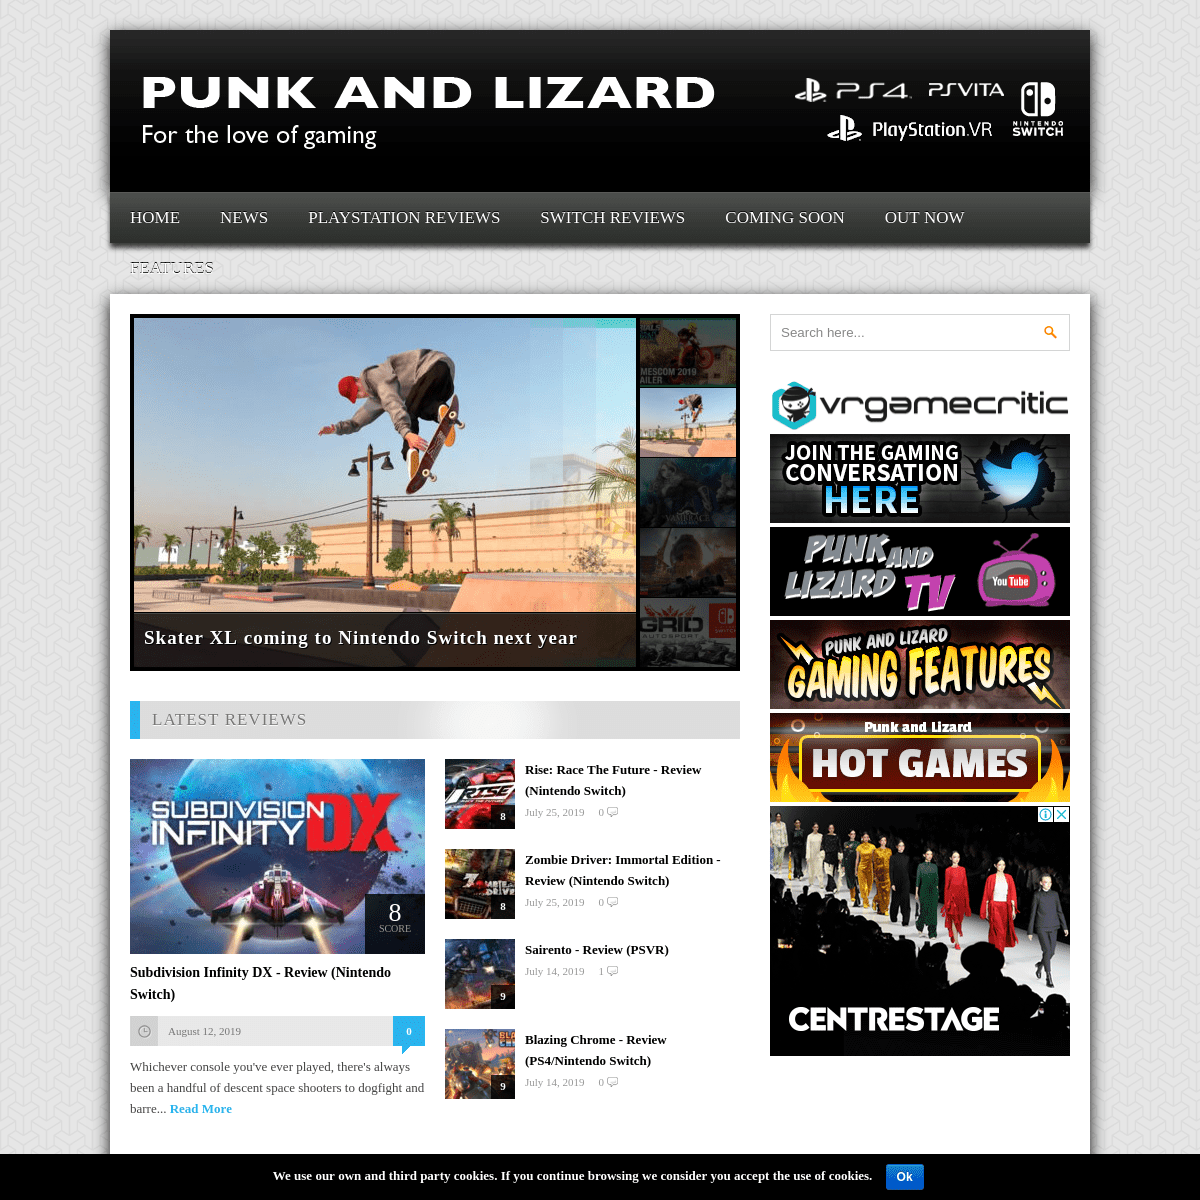 Punk and Lizard - The latest in PS4 PSVR Nintendo Switch PS Vita - News and reviews for PS4 PSVR & Nintendo Switch